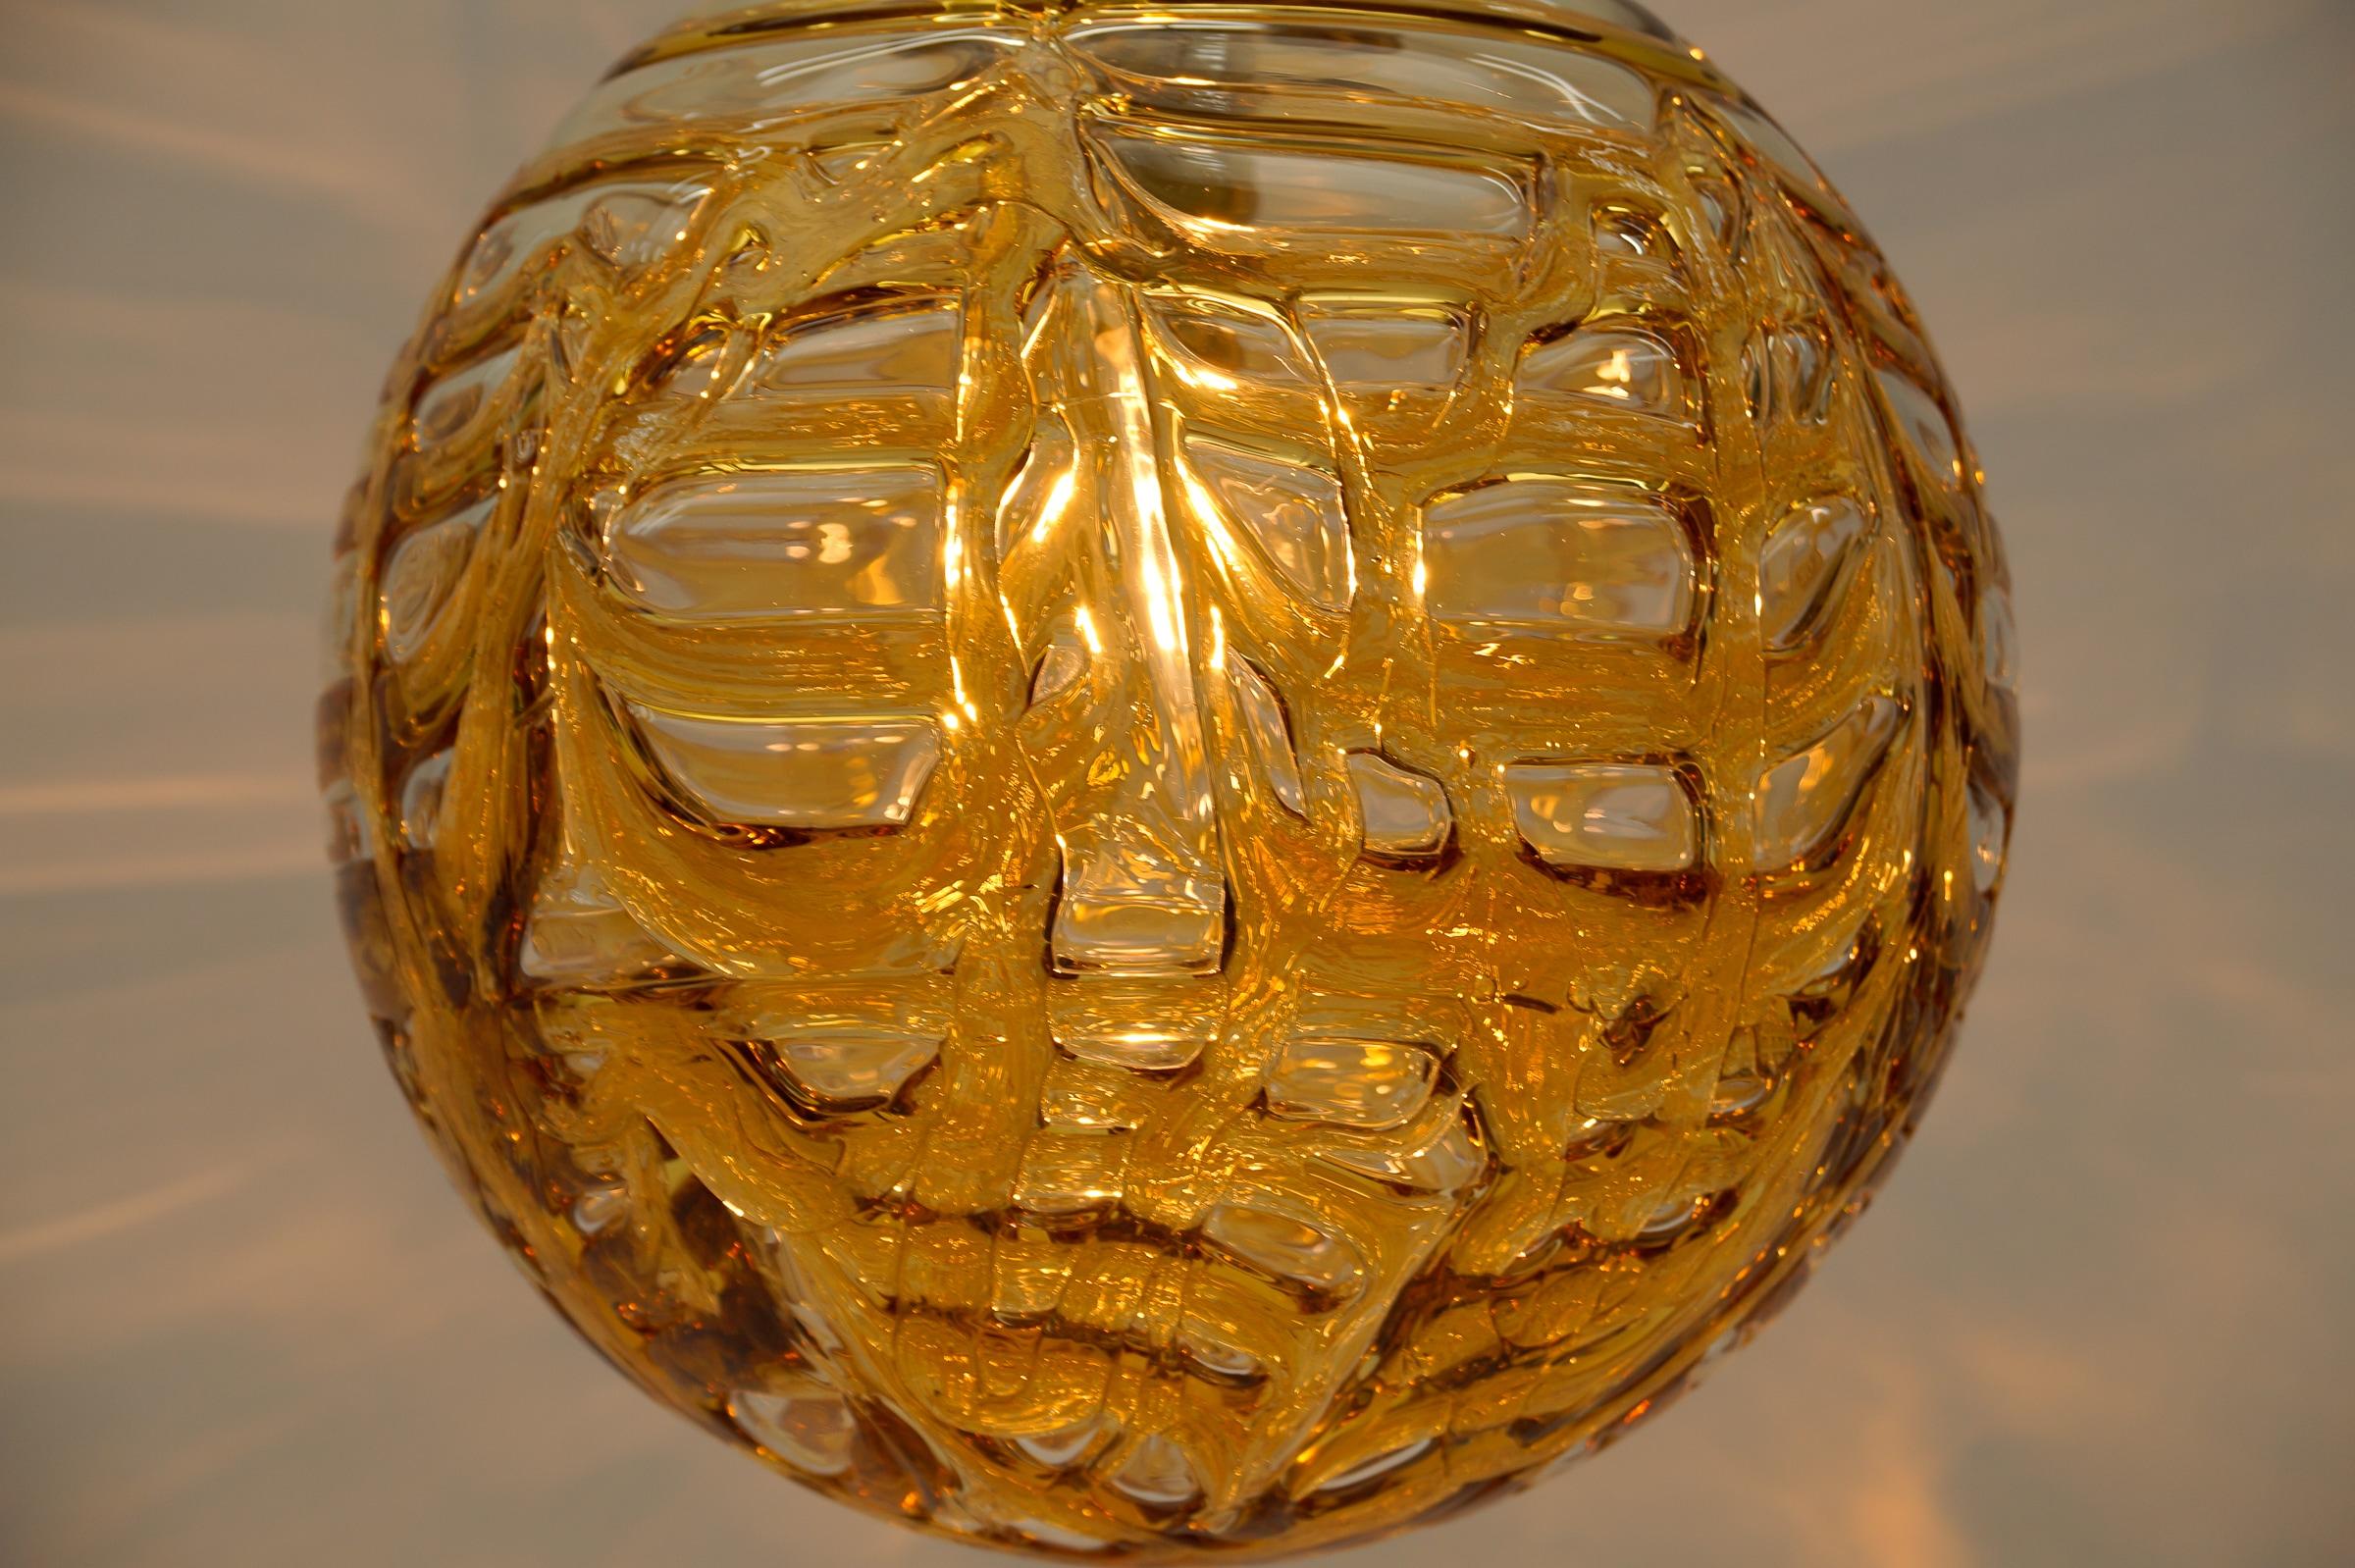 Yellow Murano Glass Ball Pendant Lamp by Doria, - 1960s Germany For Sale 4